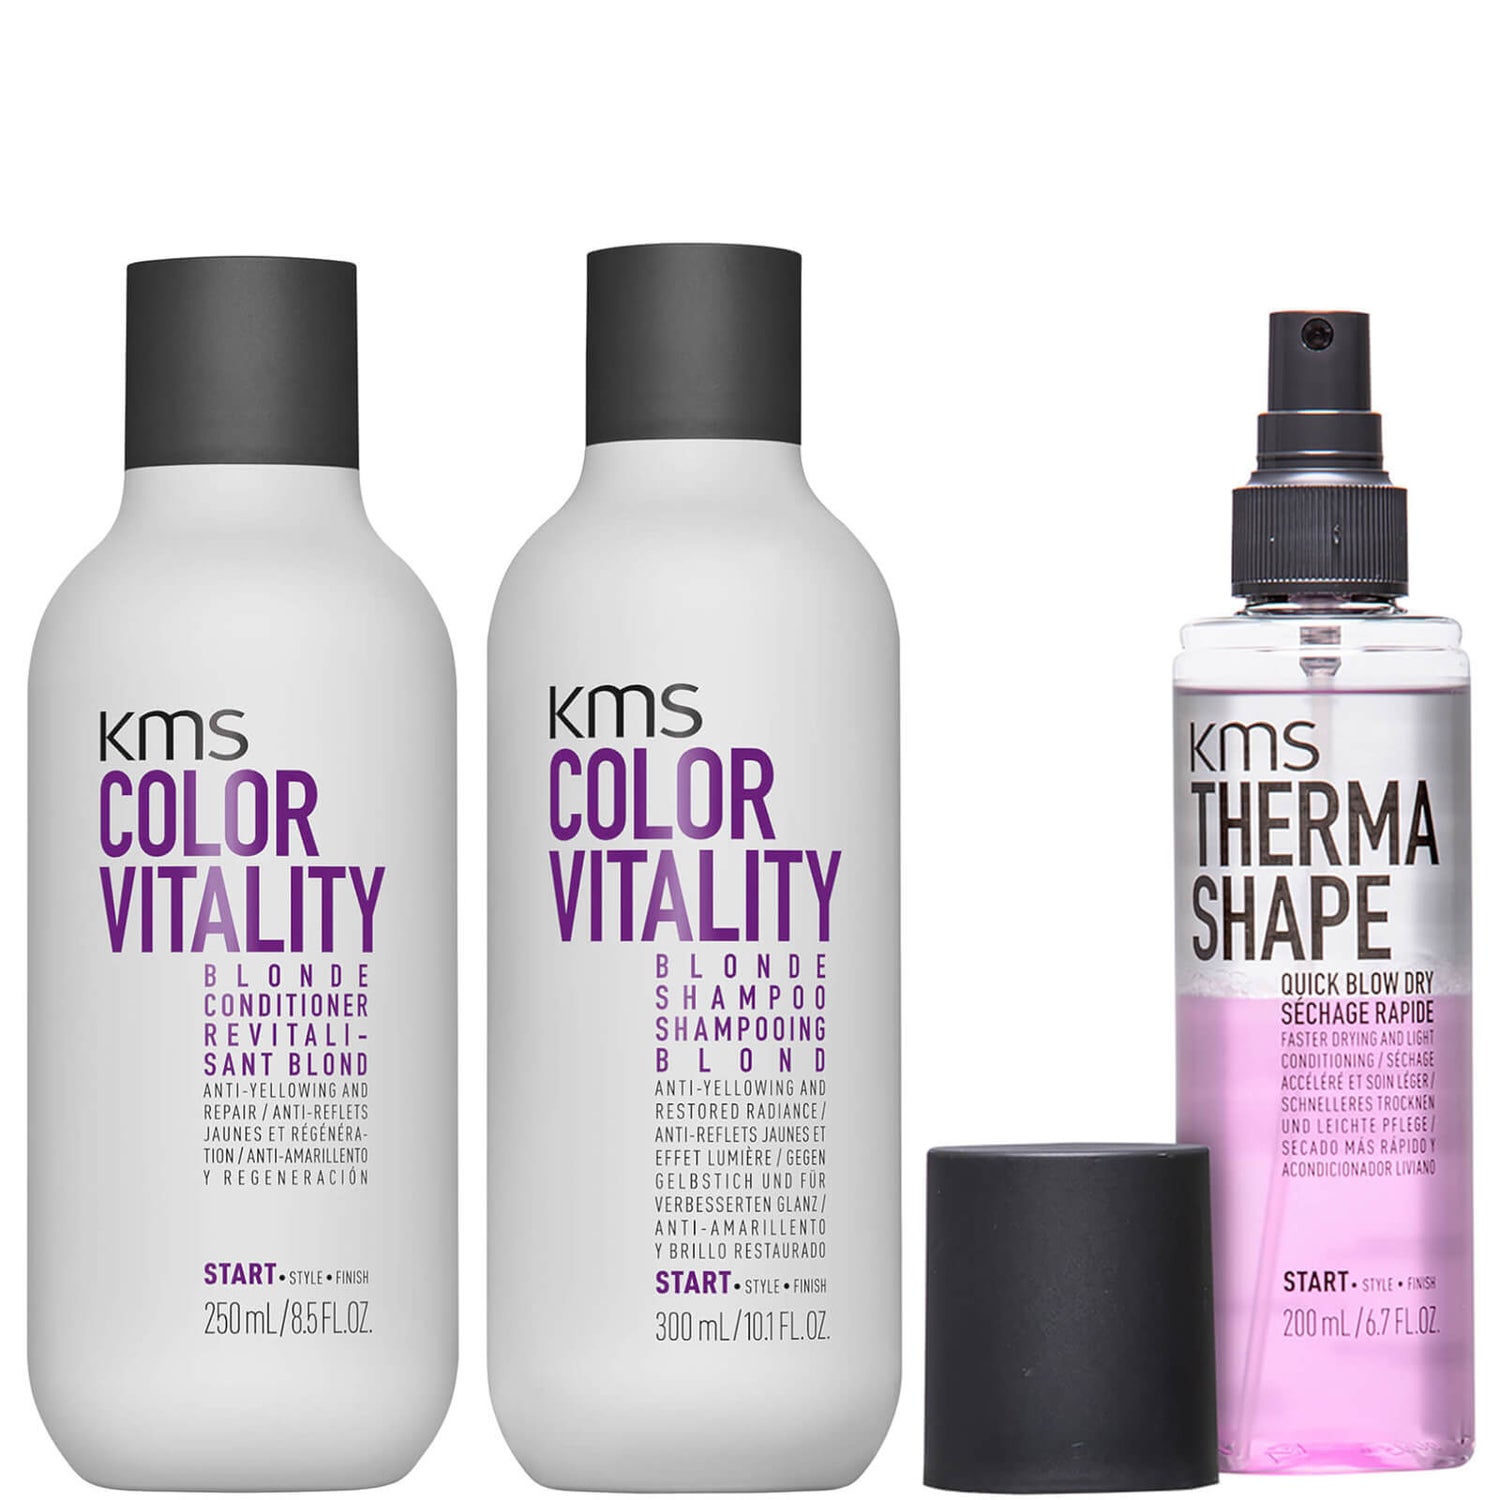 KMS Color Vitality Blonde Trio For Anti-Brassiness & Restored Radiance (Worth £66)